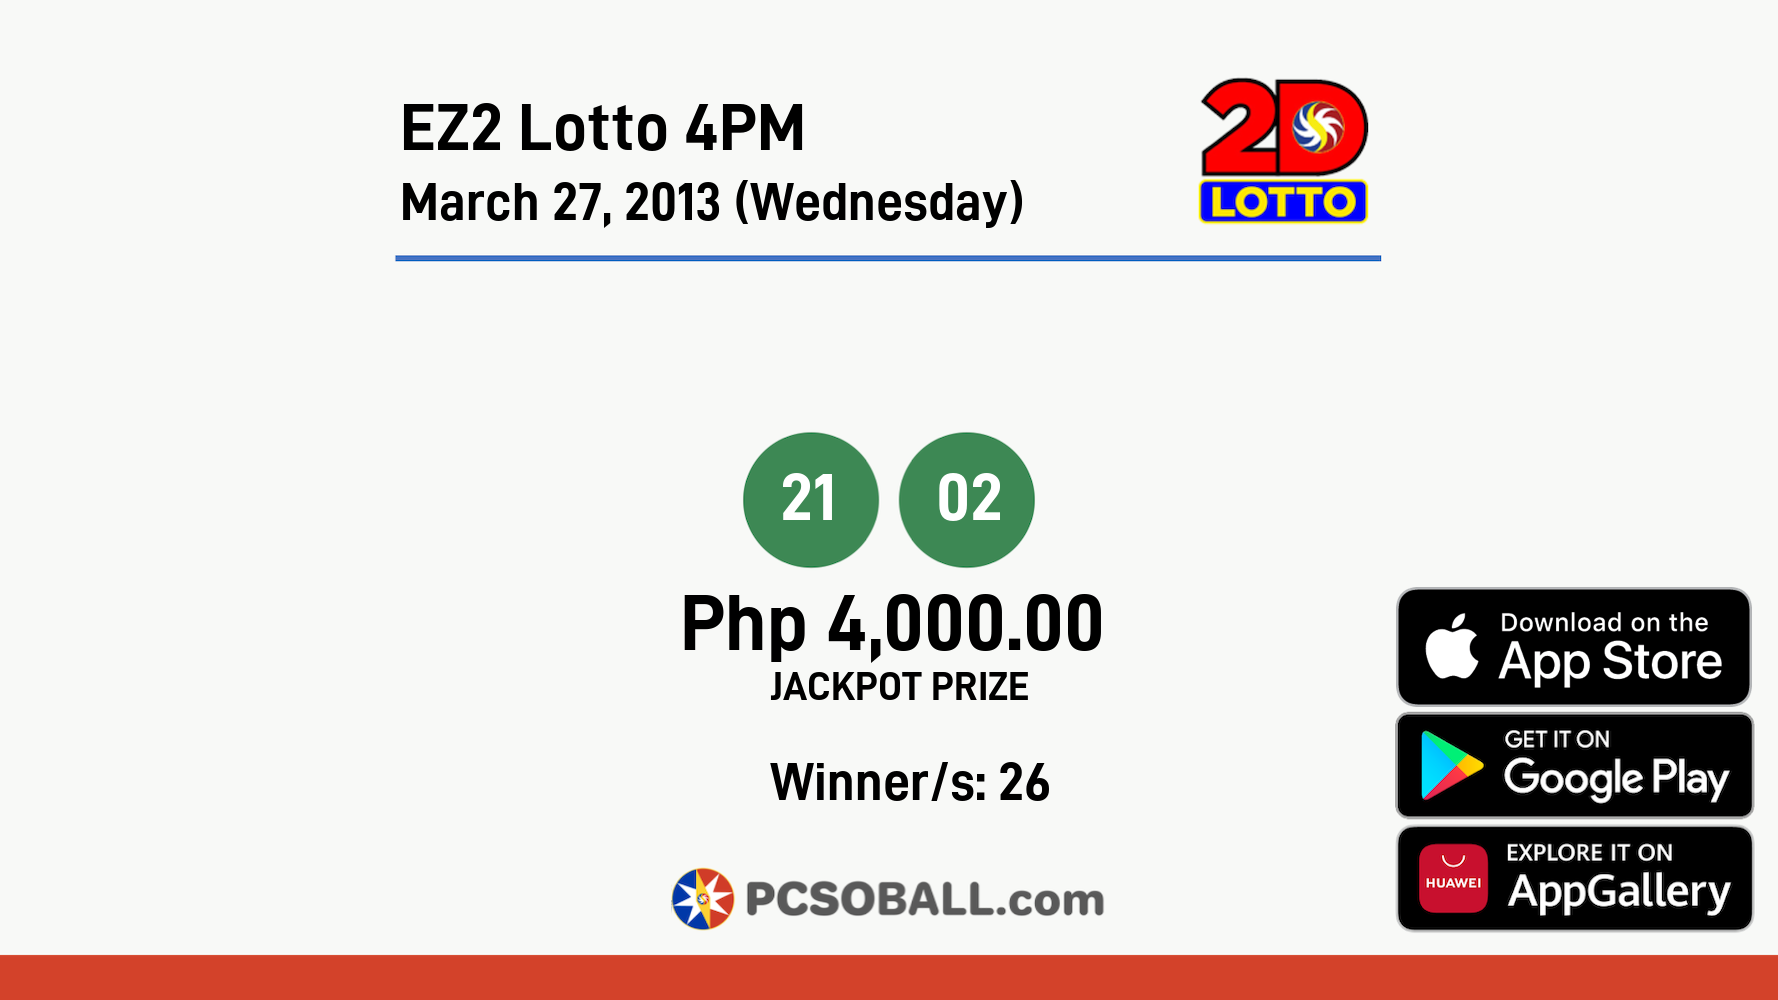 EZ2 Lotto 4PM March 27, 2013 (Wednesday) Result